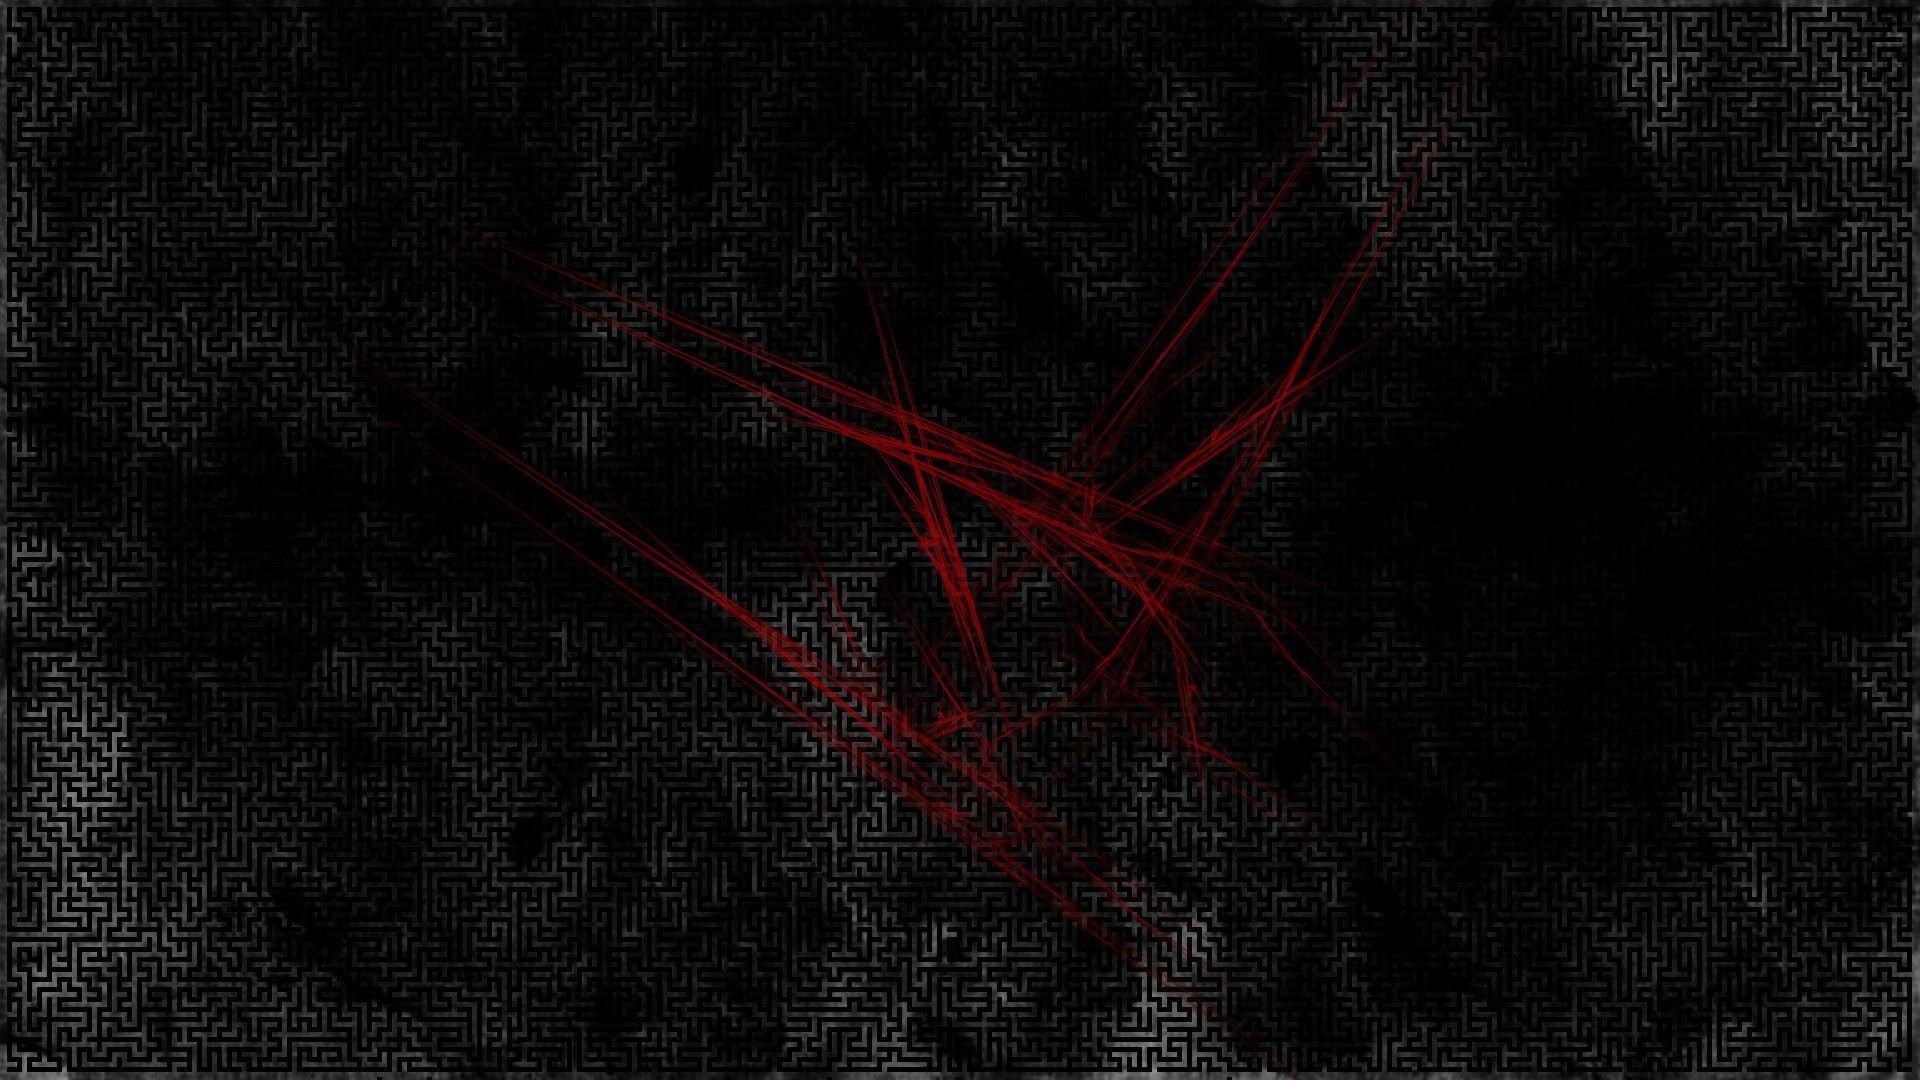 black white and red abstract wallpaper